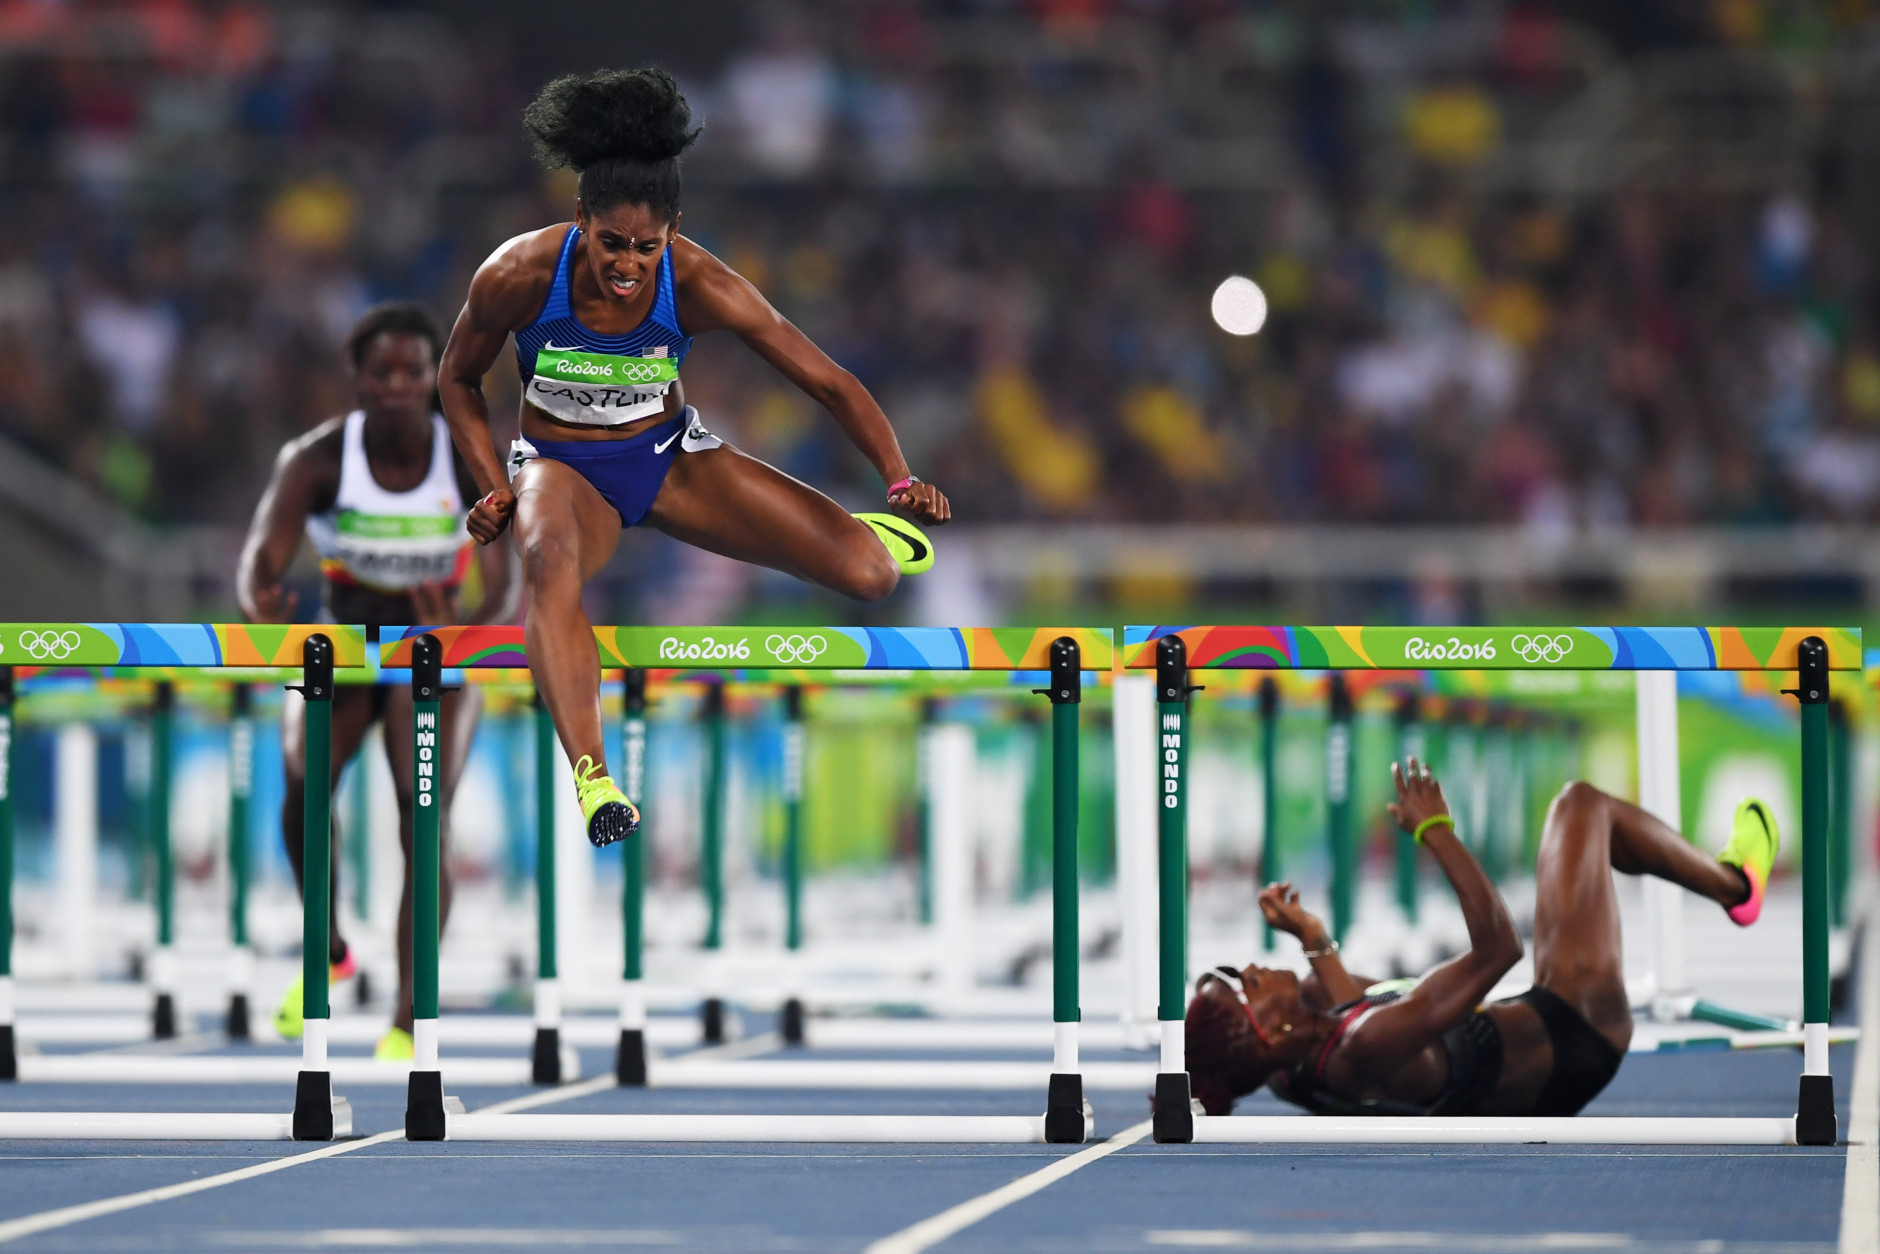 RIO DE JANEIRO, BRAZIL - AUGUST 17:  Kristi Castlin of the United States competes in the Women's 100m Hurdles Semifinals as Nikkita Holder of Canada (R) falls down on Day 12 of the Rio 2016 Olympic Games at the Olympic Stadium on August 17, 2016 in Rio de Janeiro, Brazil.  (Photo by Shaun Botterill/Getty Images)